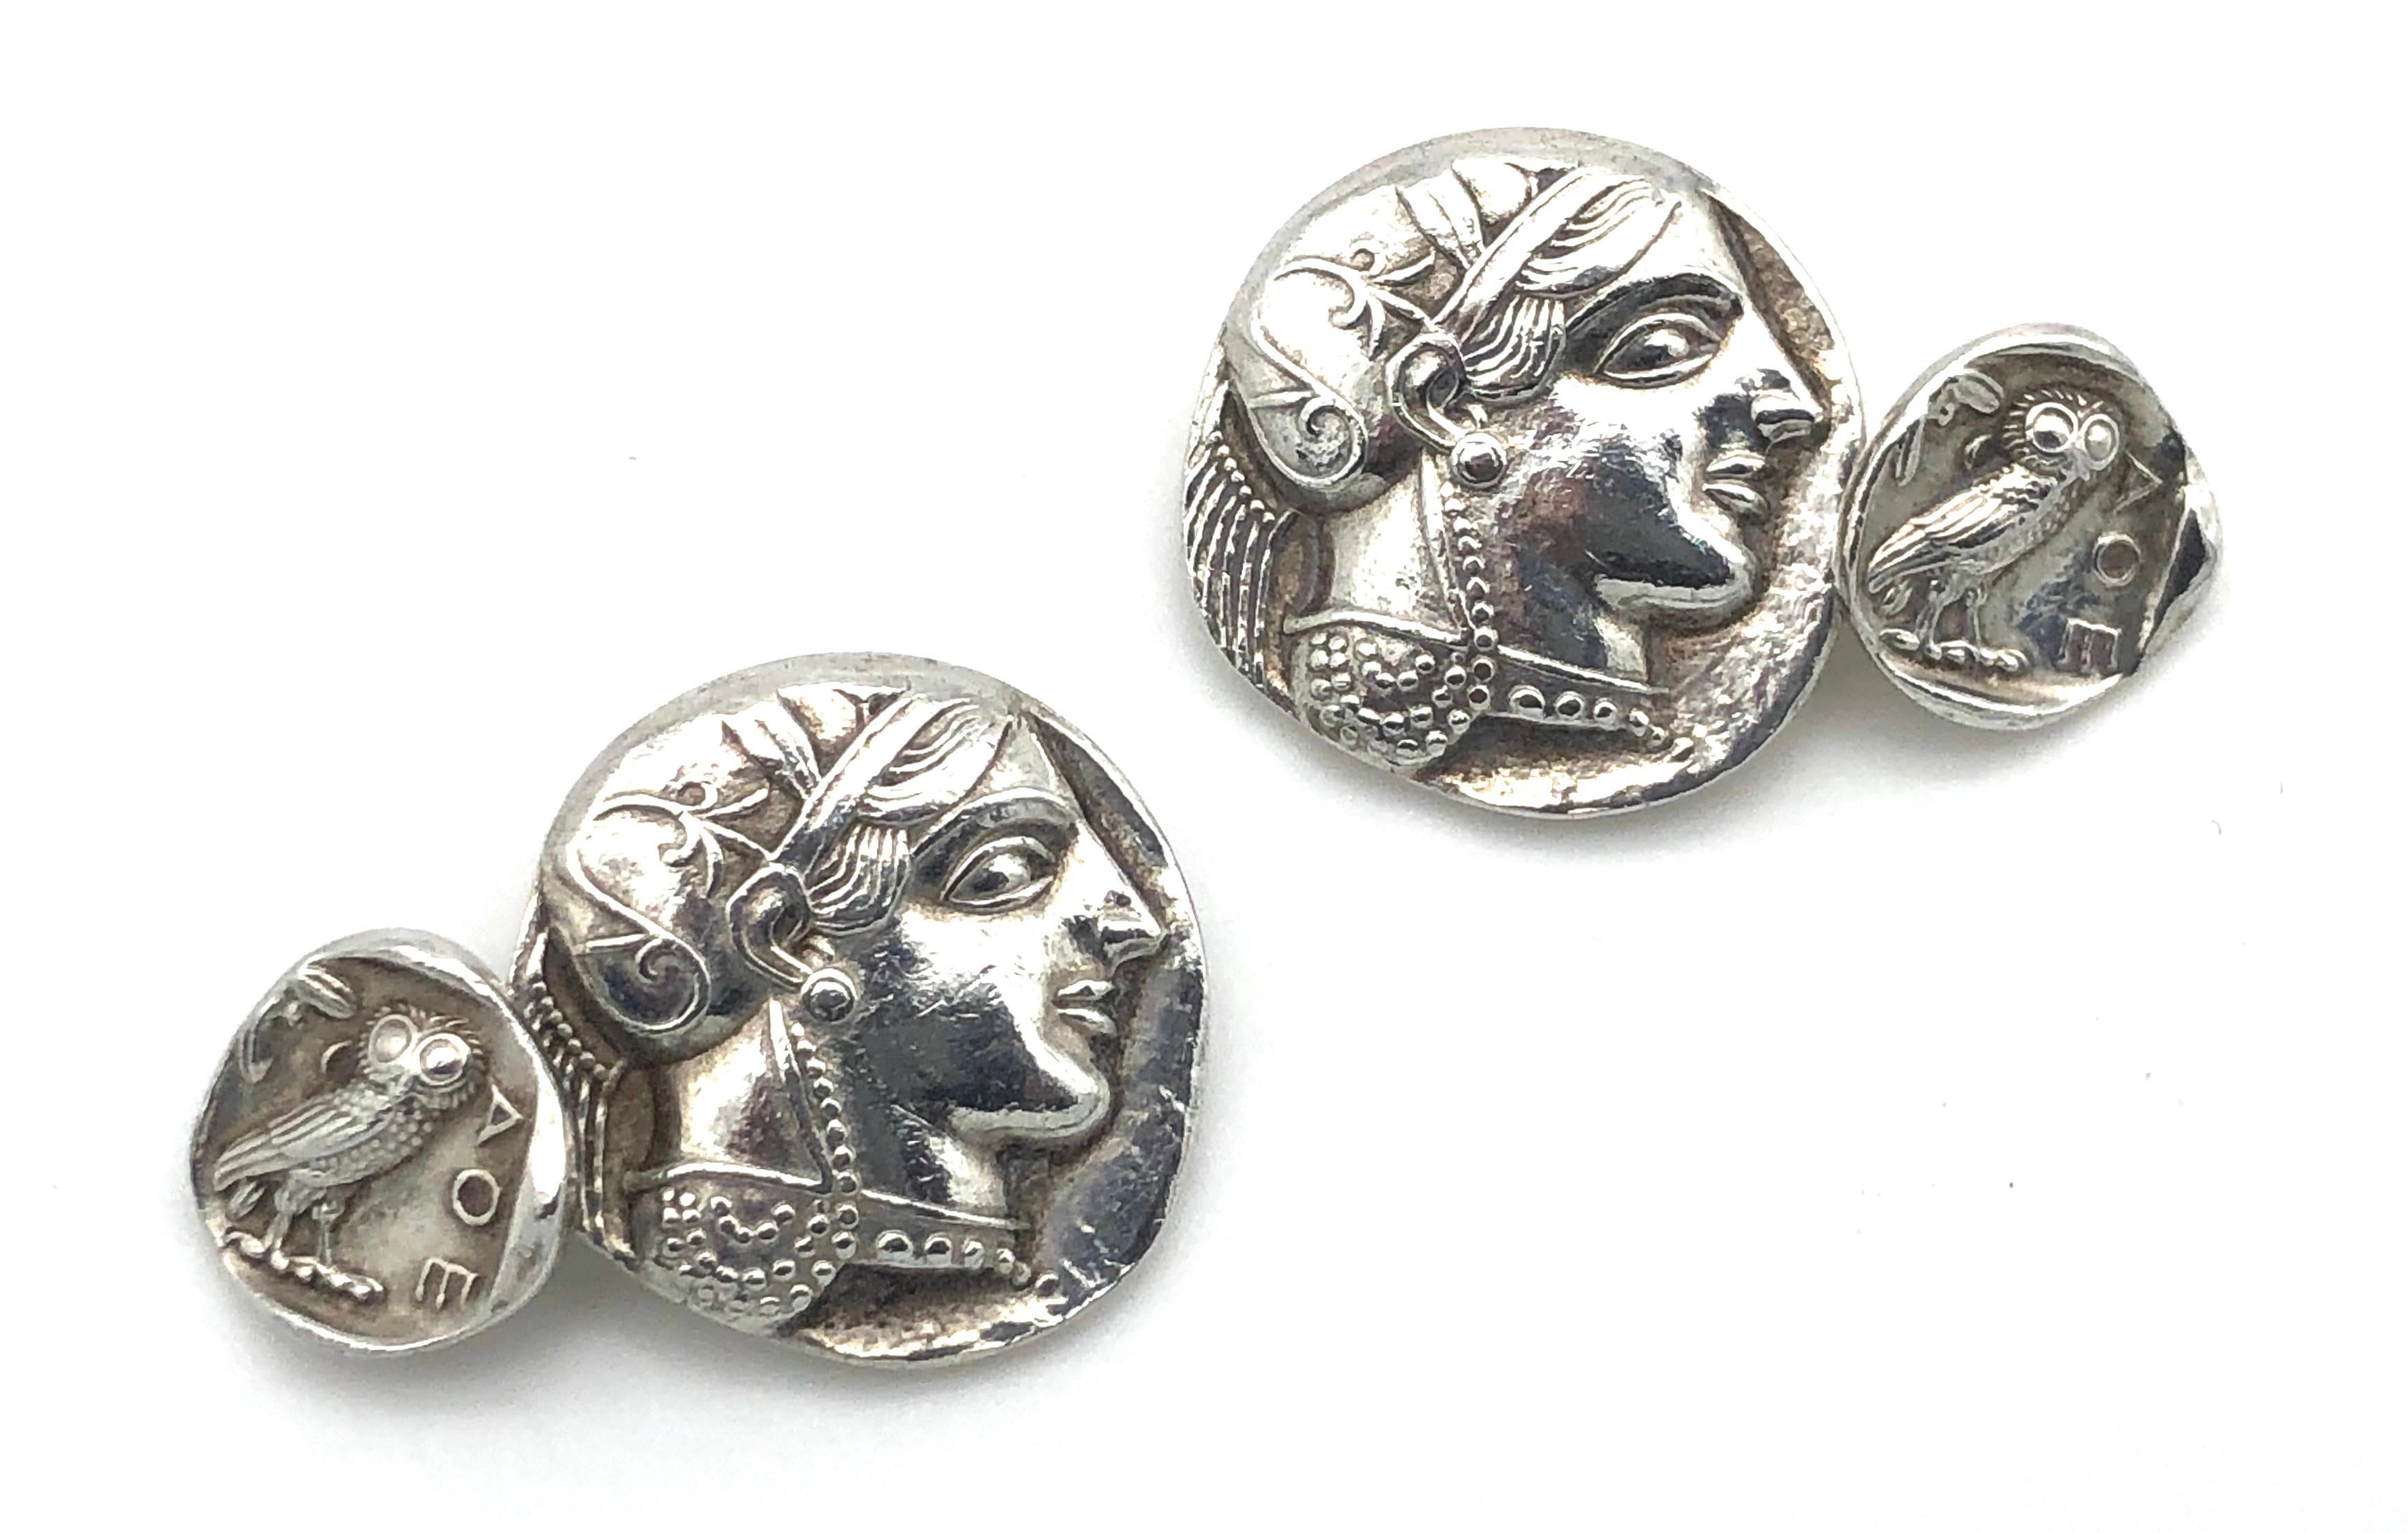 Solid silver casts of antique athenian tetradrachms have been made into an unusual pair of silver cufflinks. The front piece is a cast of the coin in original size depicting Athena, the greek goddess of wisdom and war. The smaller coin is a reduced